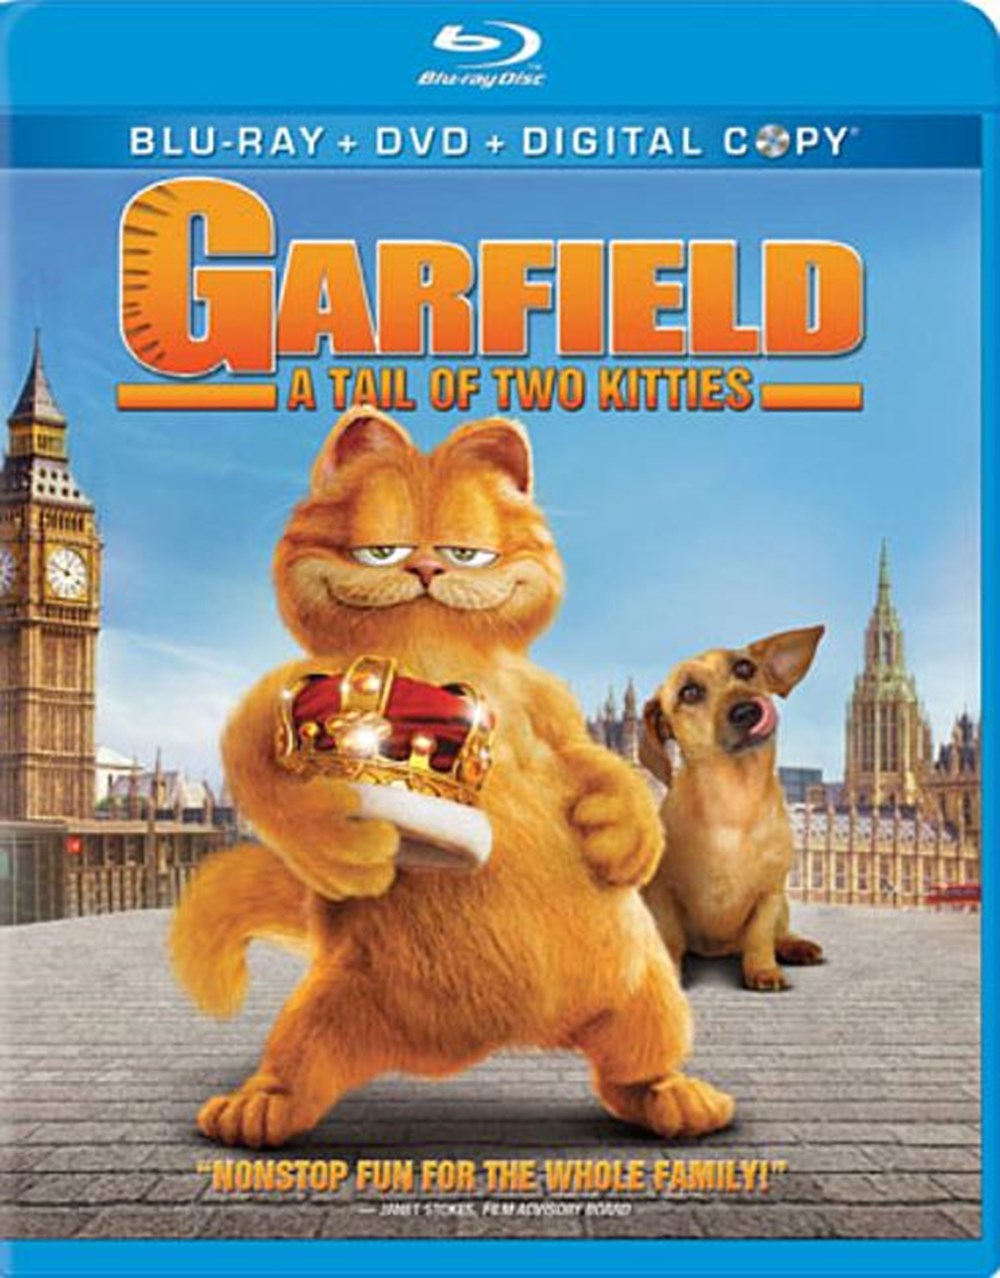 Garfield A Tail of Two Kitties (DVD & Digital Copy Included)